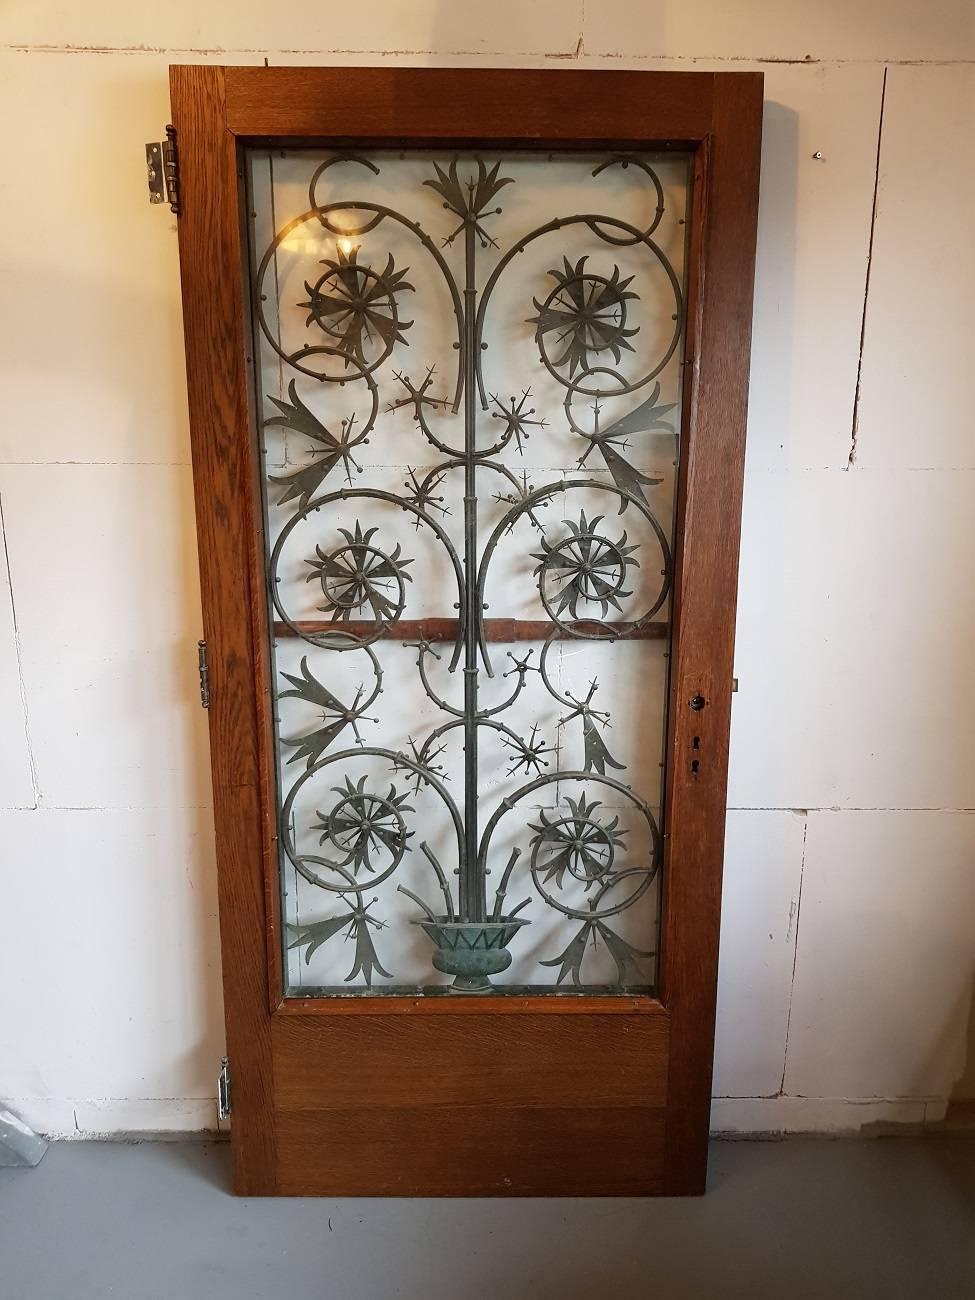 Handmade bronze Art Nouveau door grille mounted in a solid oak door from about 1910. The grille can be sold with out the door.

The measurements including the door are, 
Depth 4,5 cm/ 1.7 inch.  The bronze grille alone is Depth 3,5 cm/ 1.3